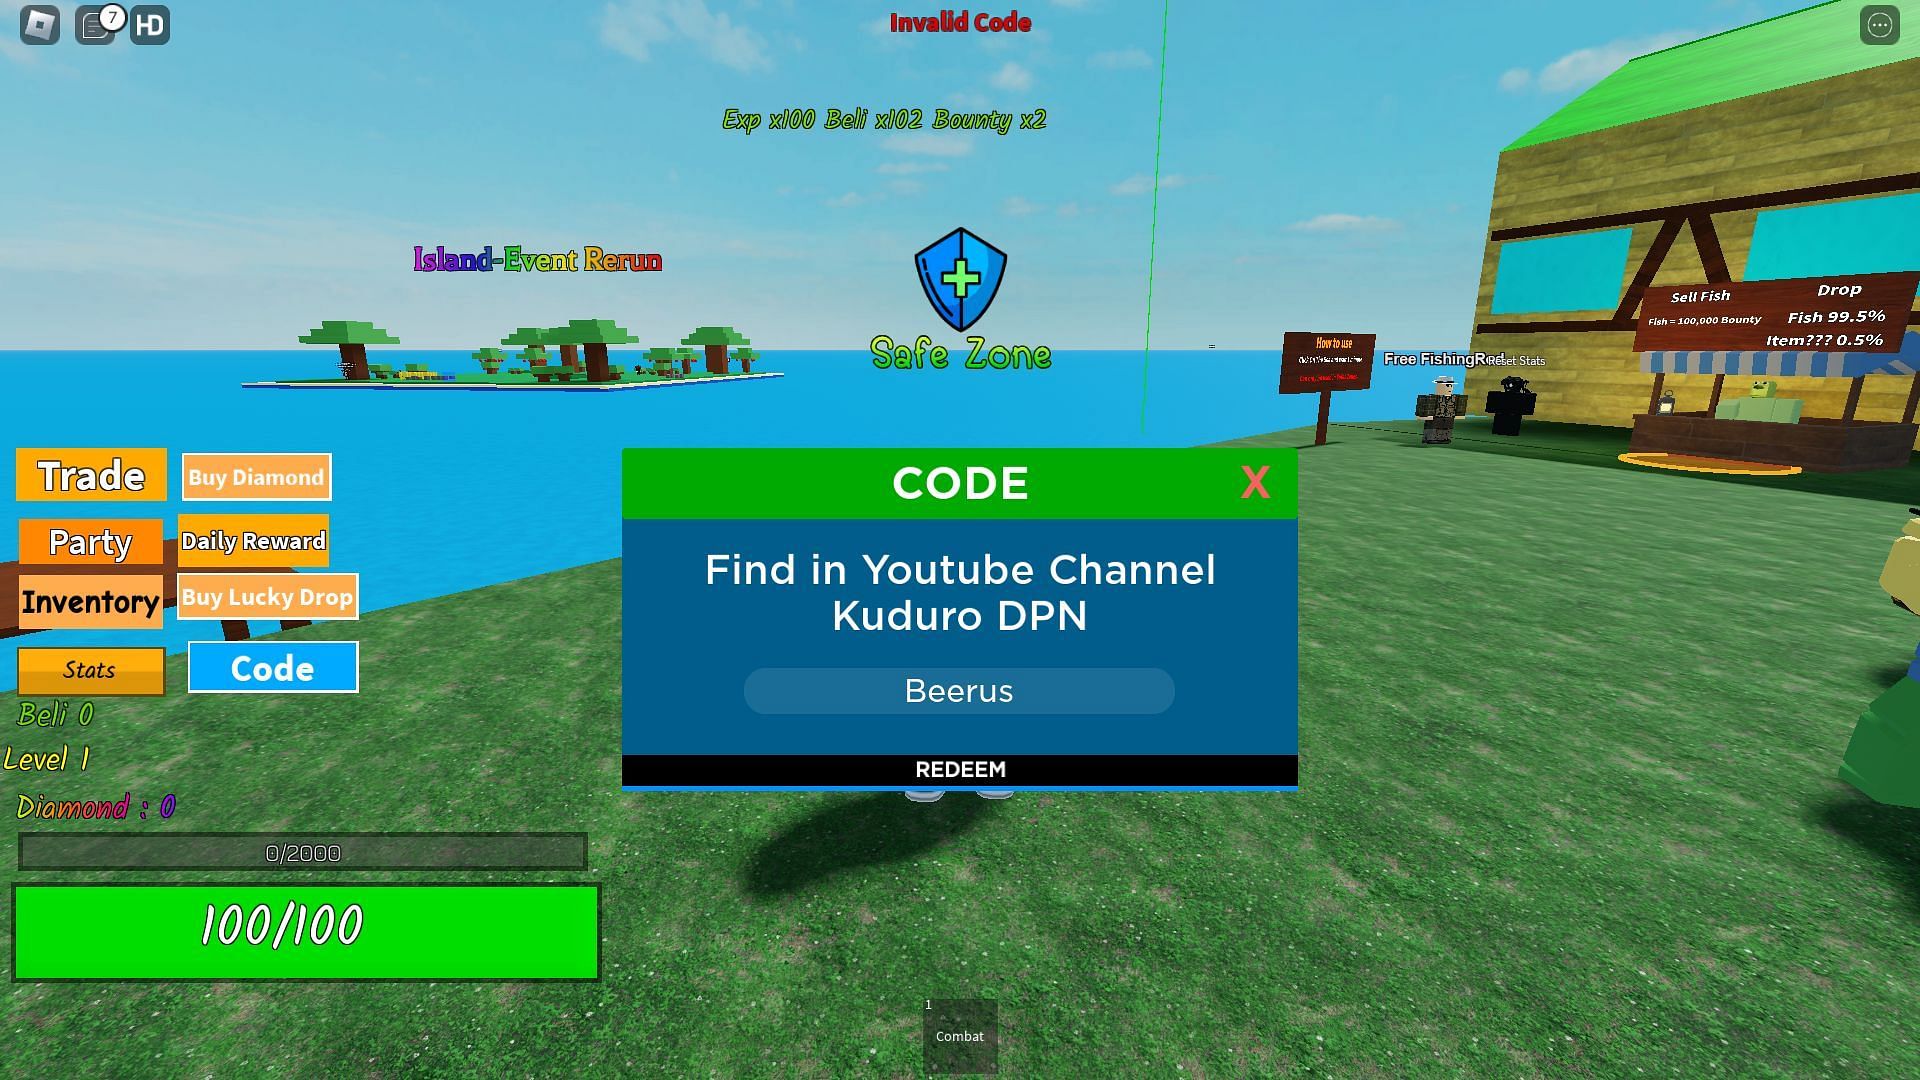 Troubleshooting codes for Rock Fruit (Image via Roblox)